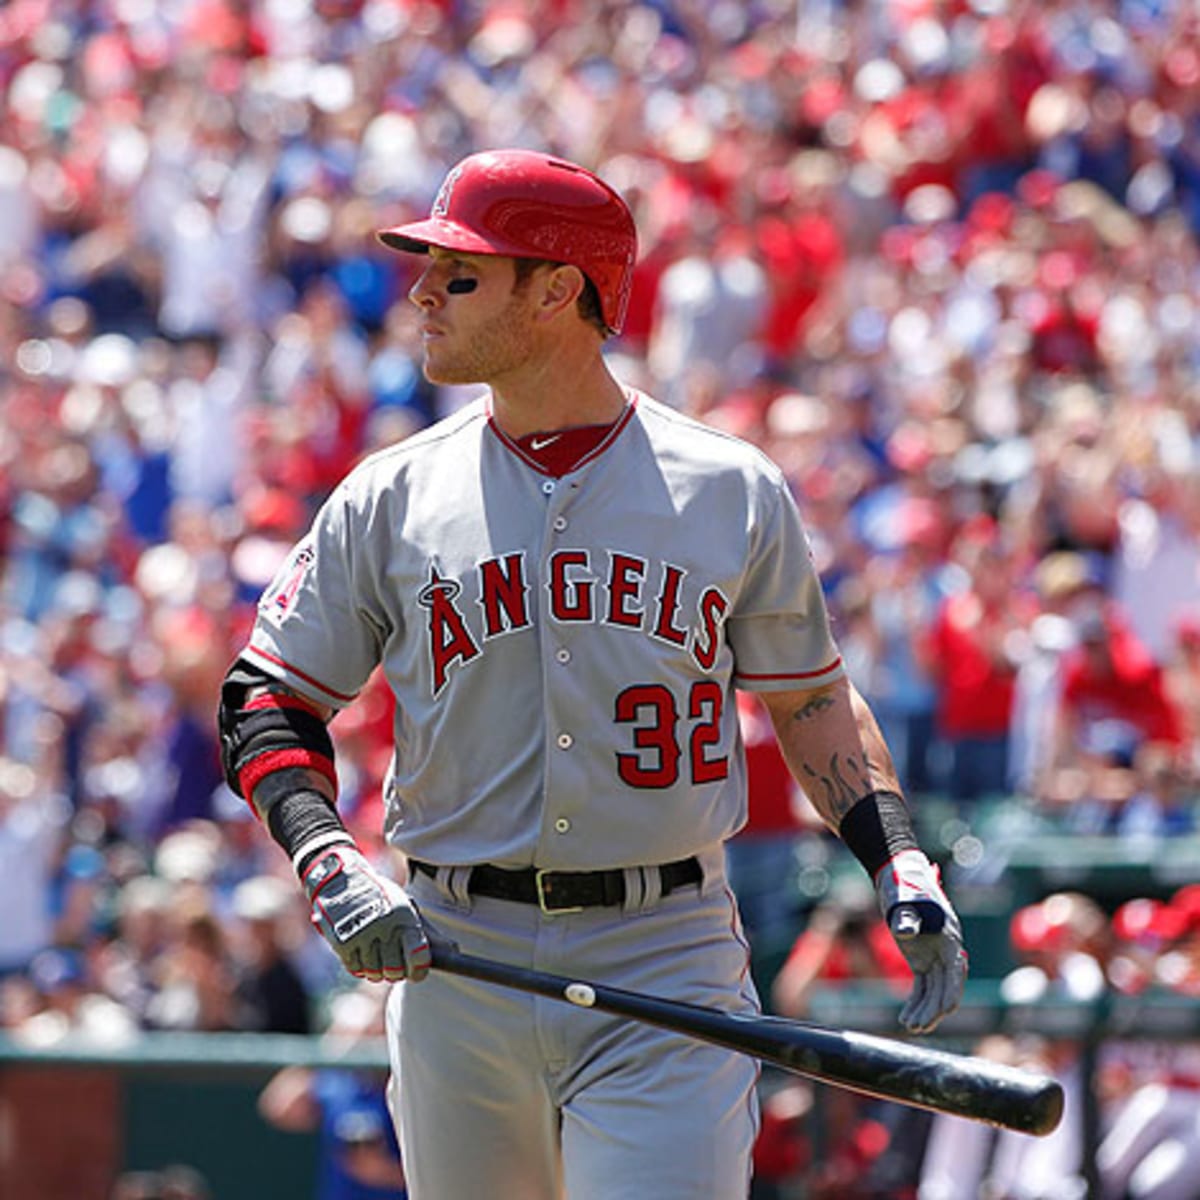 Josh Hamilton's wife verbally abused by Rangers fans - Sports